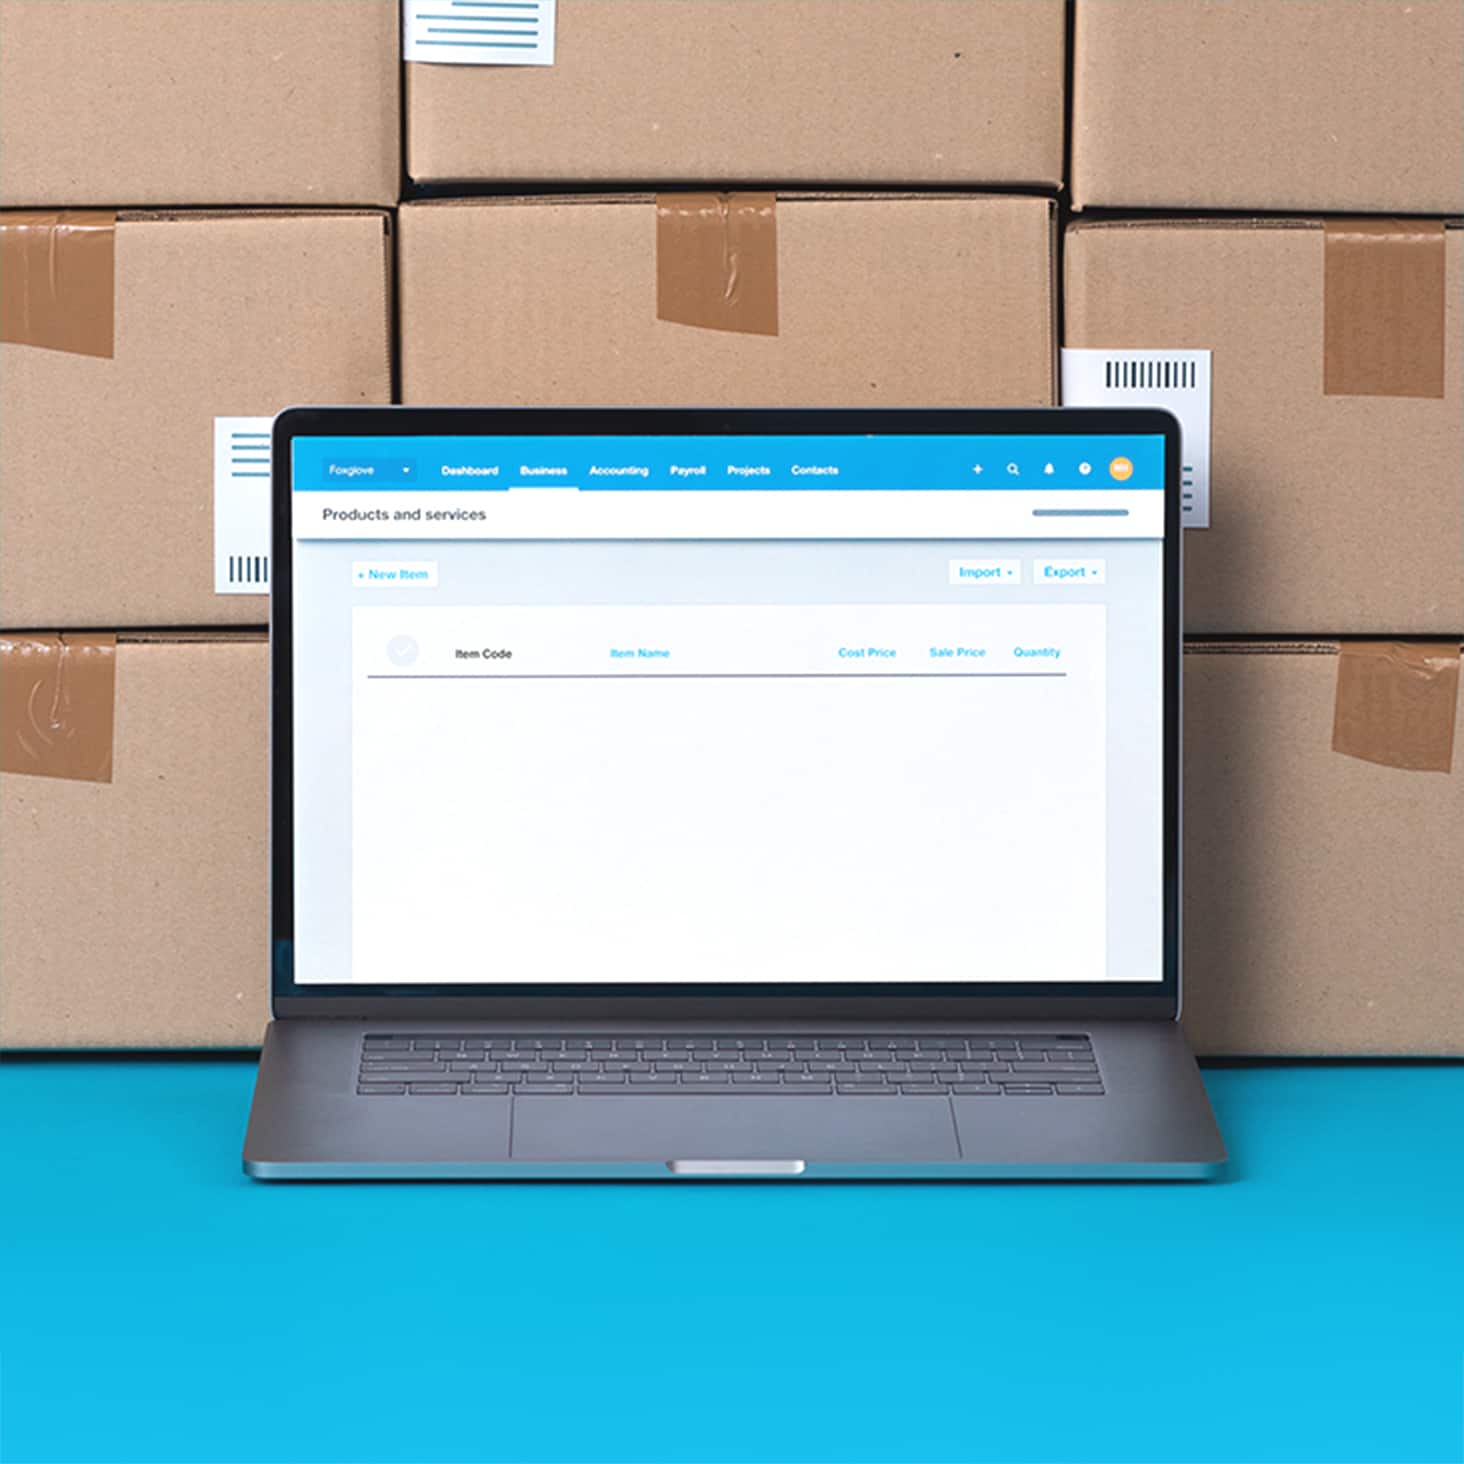 Unopened boxes containing new stock are stacked near a laptop that displays items in the stock management software.